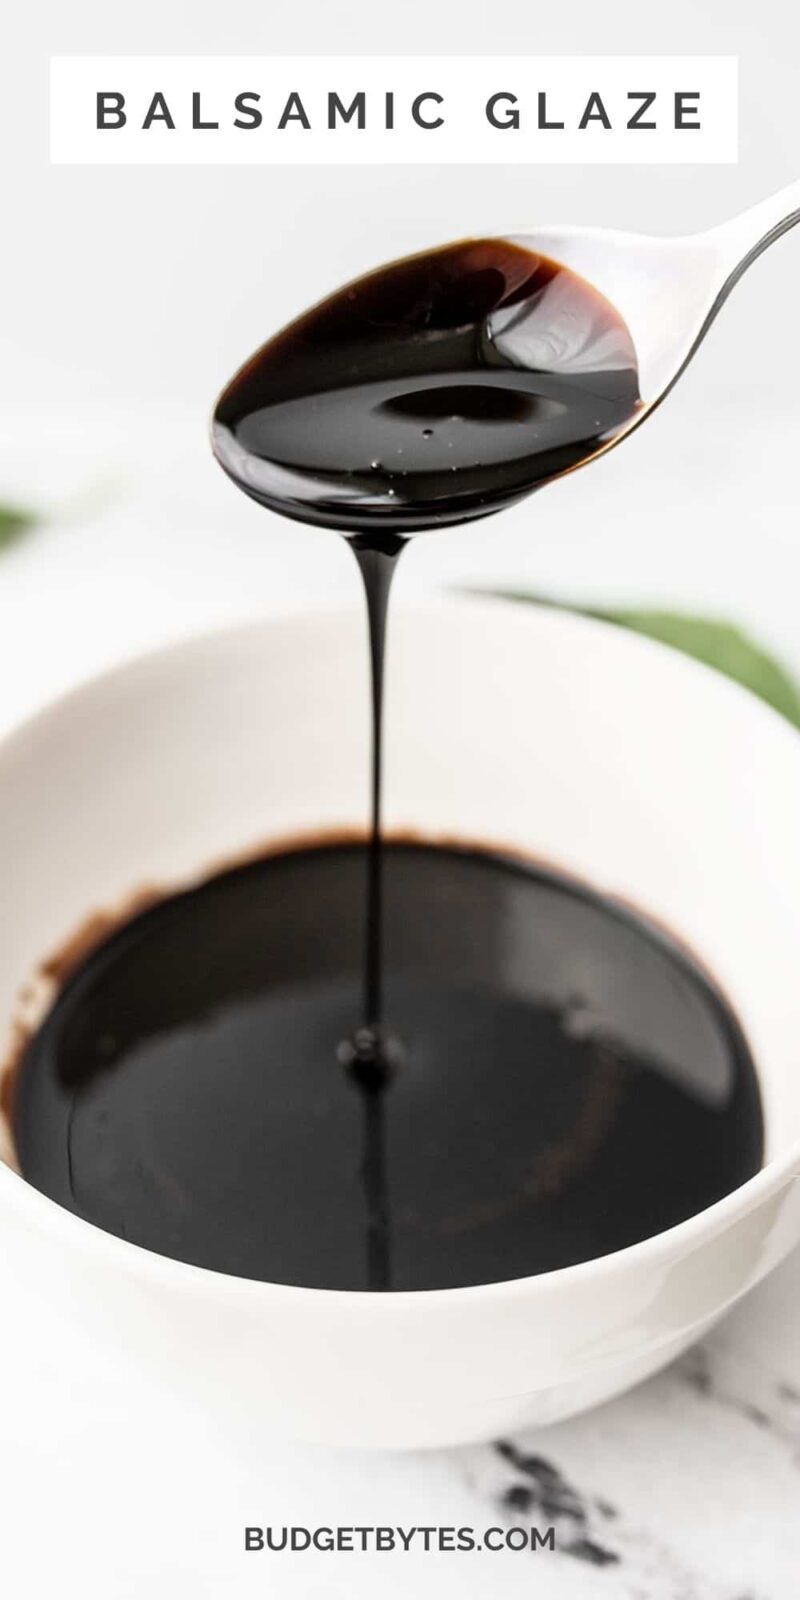 balsamic glaze dripping off a spoon into a bowl, title text at the top